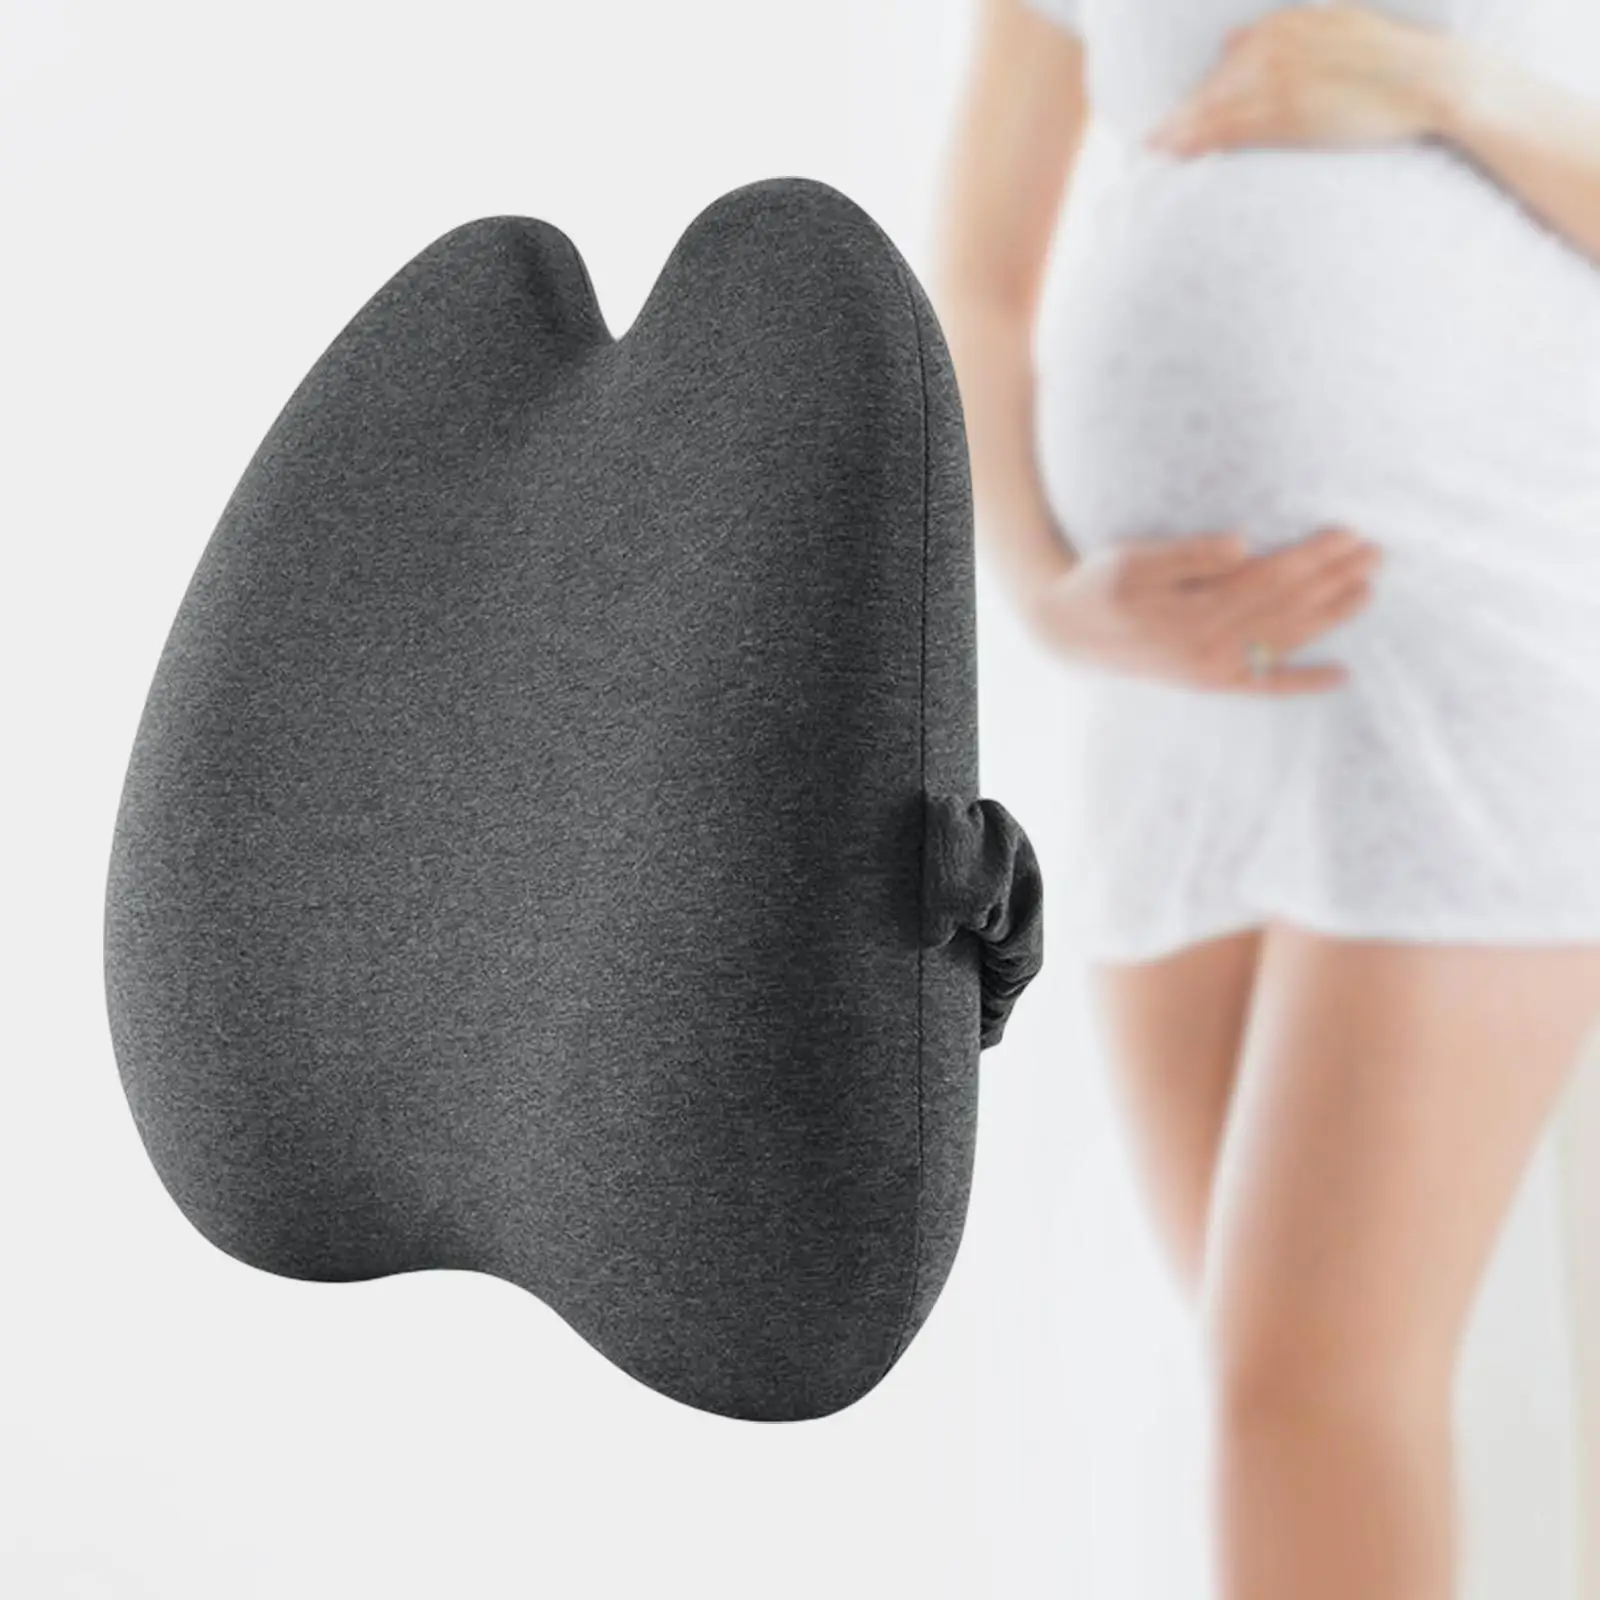 Lumbar Support Coccyx Pain Relief Soft Promotes Healthy Posture Back for Car Plane Pregnant Woman Girl Student